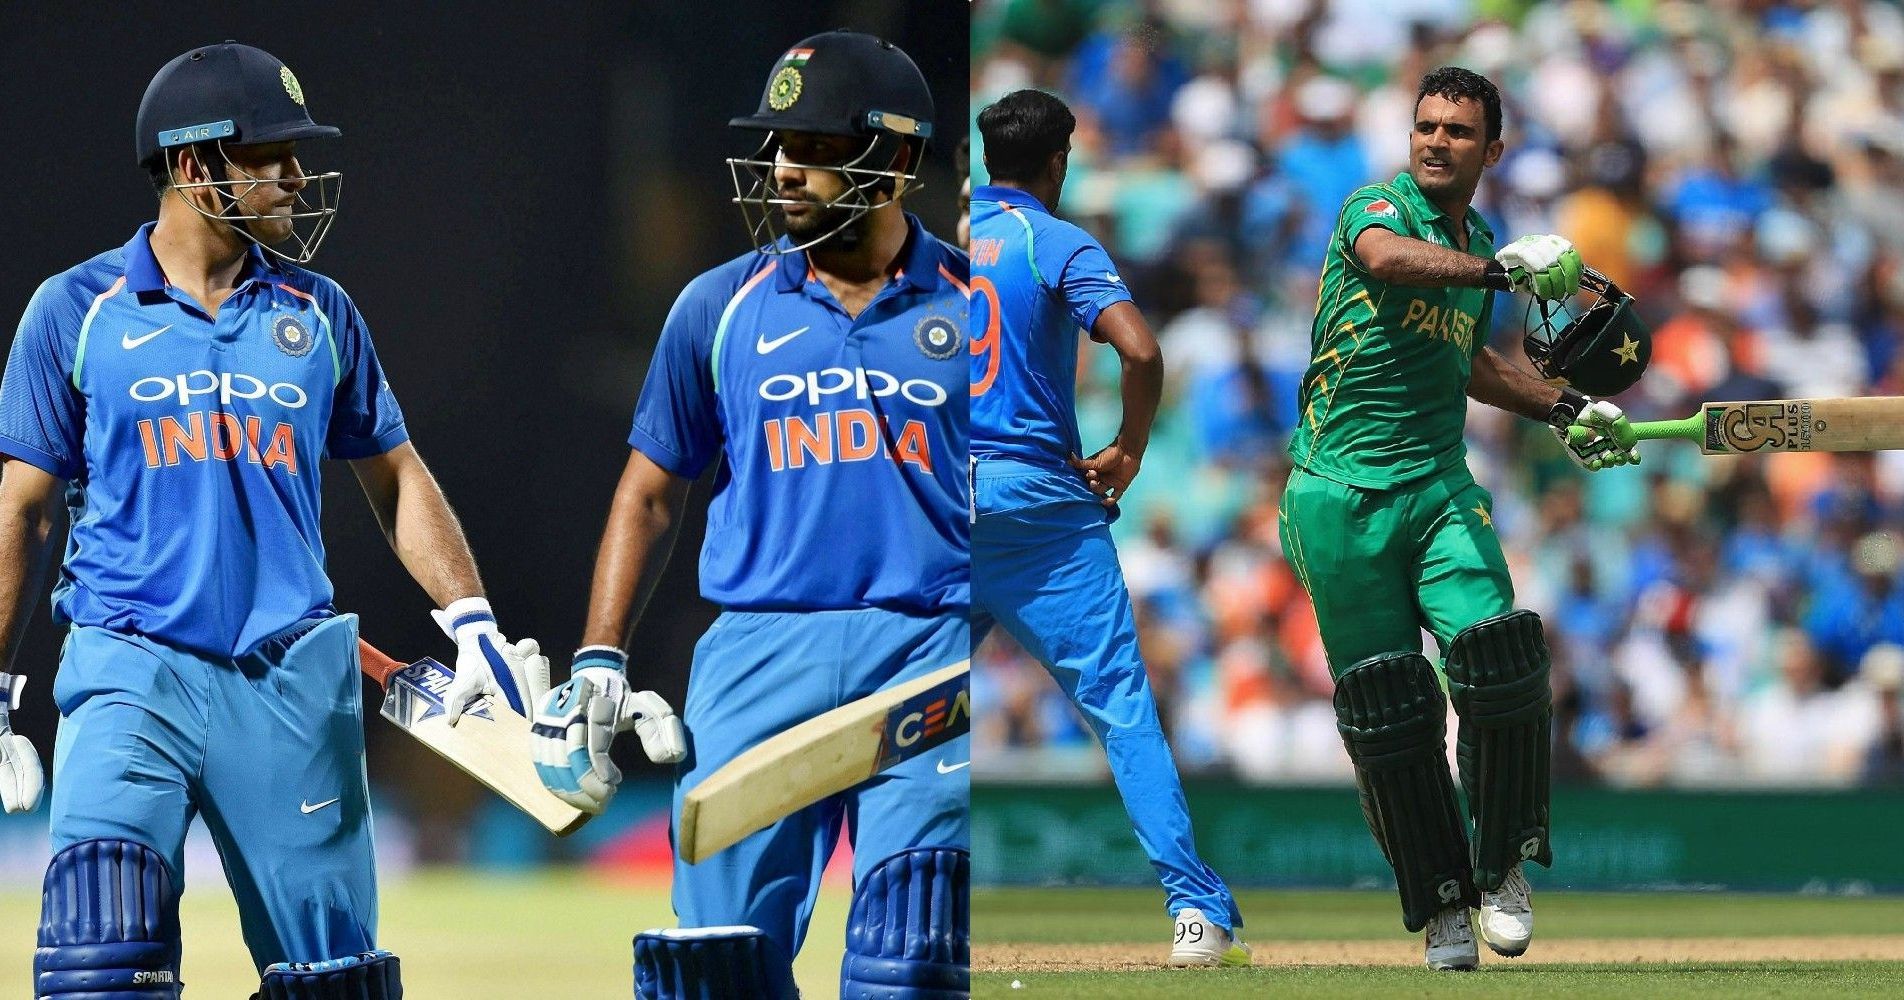 When India Face Pakistan In Asia Cup They Will Look To Avenge The